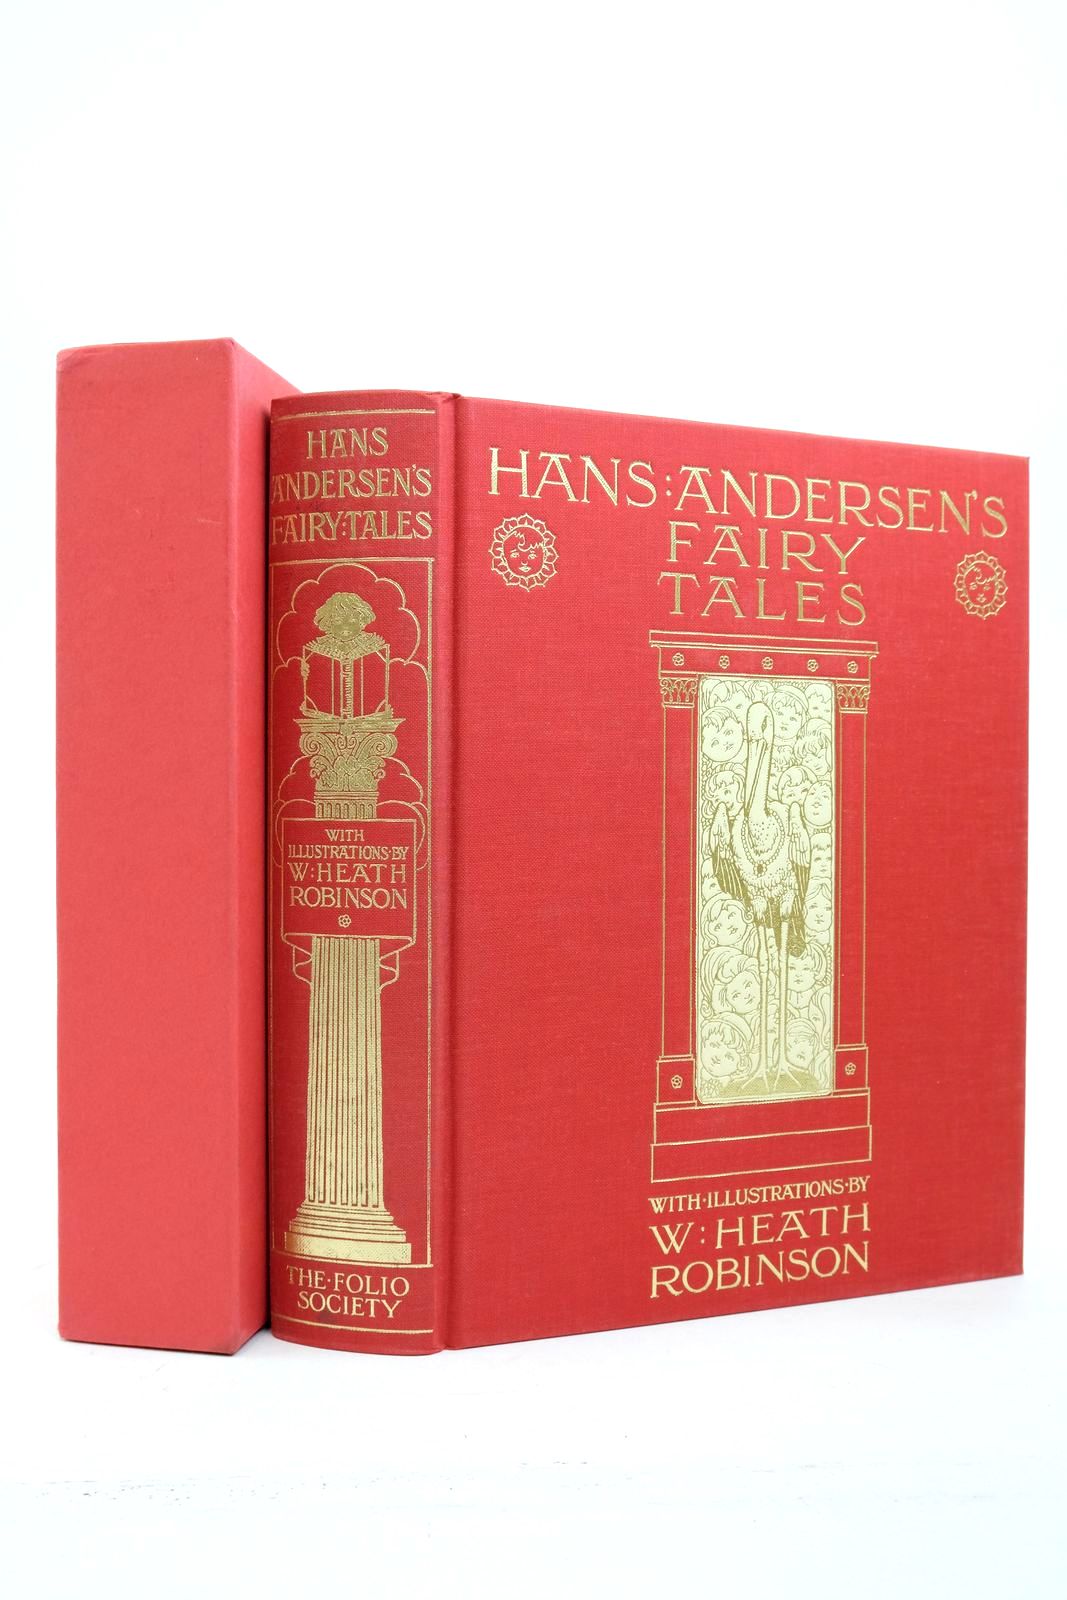 Photo of HANS ANDERSEN'S FAIRY TALES written by Andersen, Hans Christian illustrated by Robinson, W. Heath published by Folio Society (STOCK CODE: 2140966)  for sale by Stella & Rose's Books